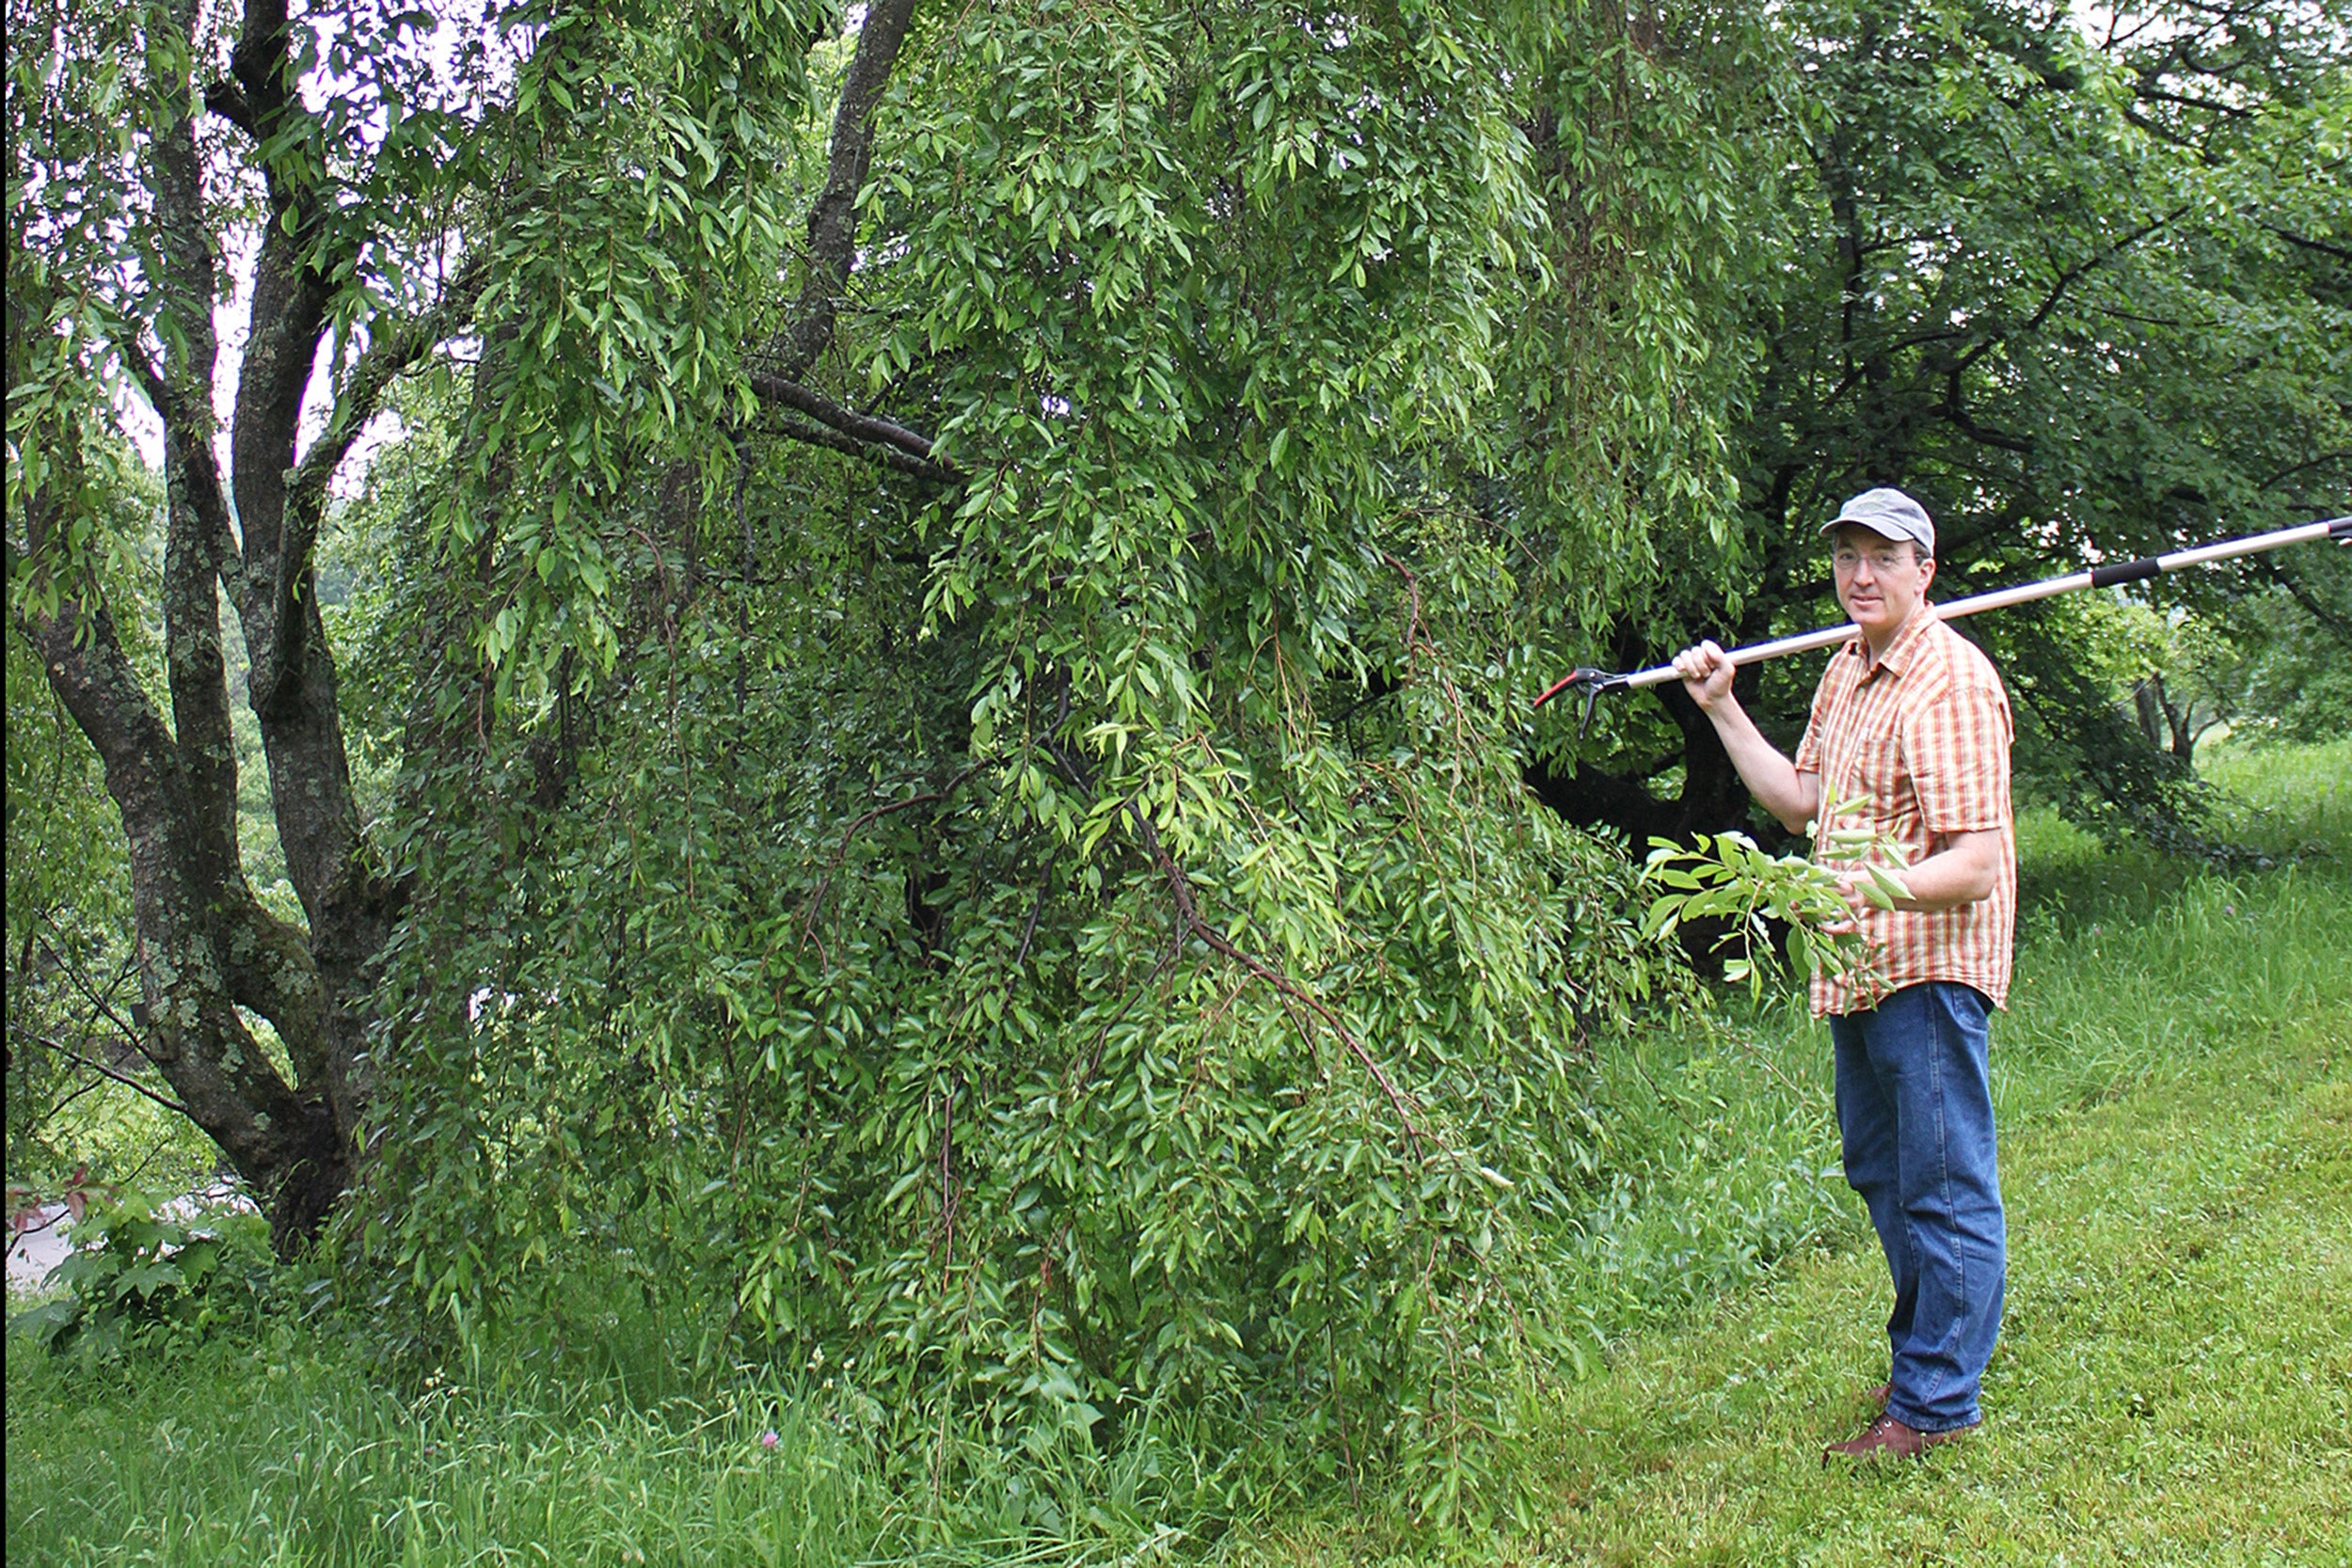 Andrew Groover, U.S. Forest Service research geneticist uses a pole pruner at the Arnold Arboretum to collect small samples of genetic material from the willows (Salix) collection